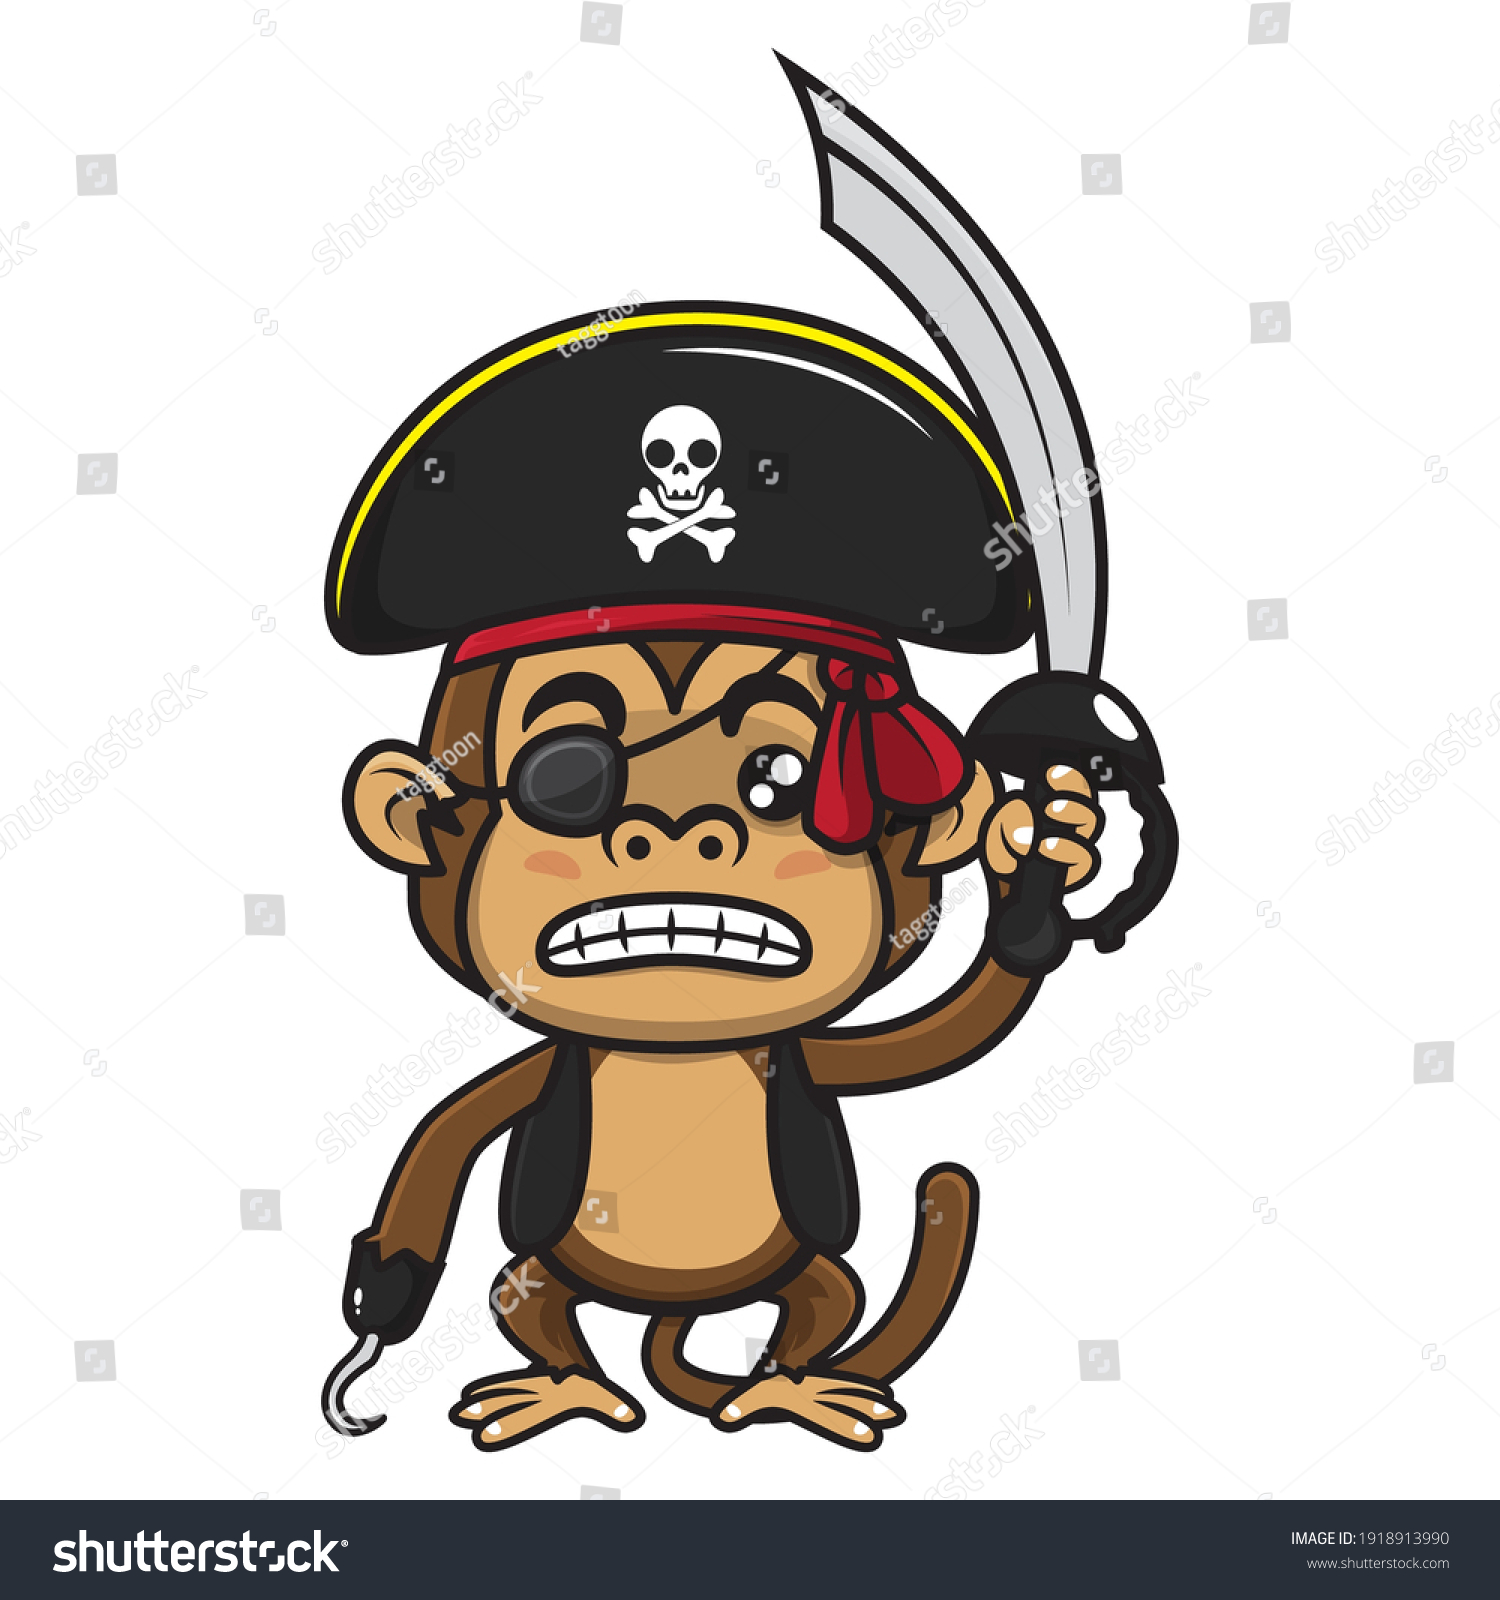 SVG of Angry little Pirates Captain Monkey wearing a pirates cap, pirates blindfold, and hook, carrying a cutlass get ready to attack opponent ship, best for mascot of Pirates themes for children svg